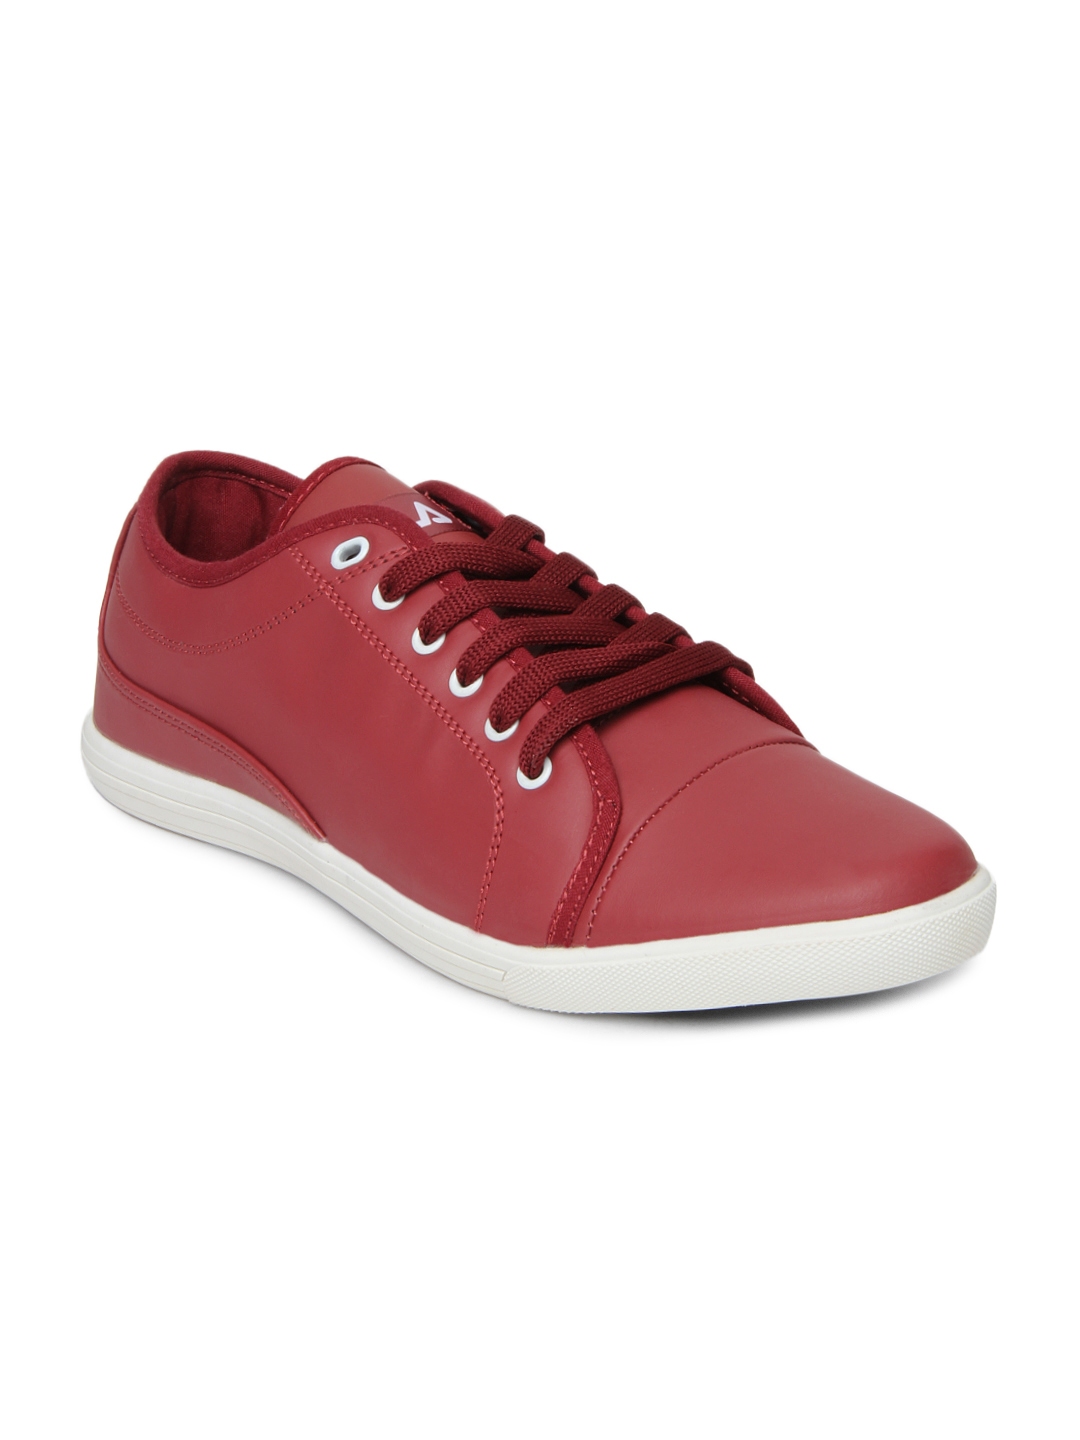 Buy FILA Men Brick Red Casual Shoes - Casual Shoes for Men 417772 | Myntra